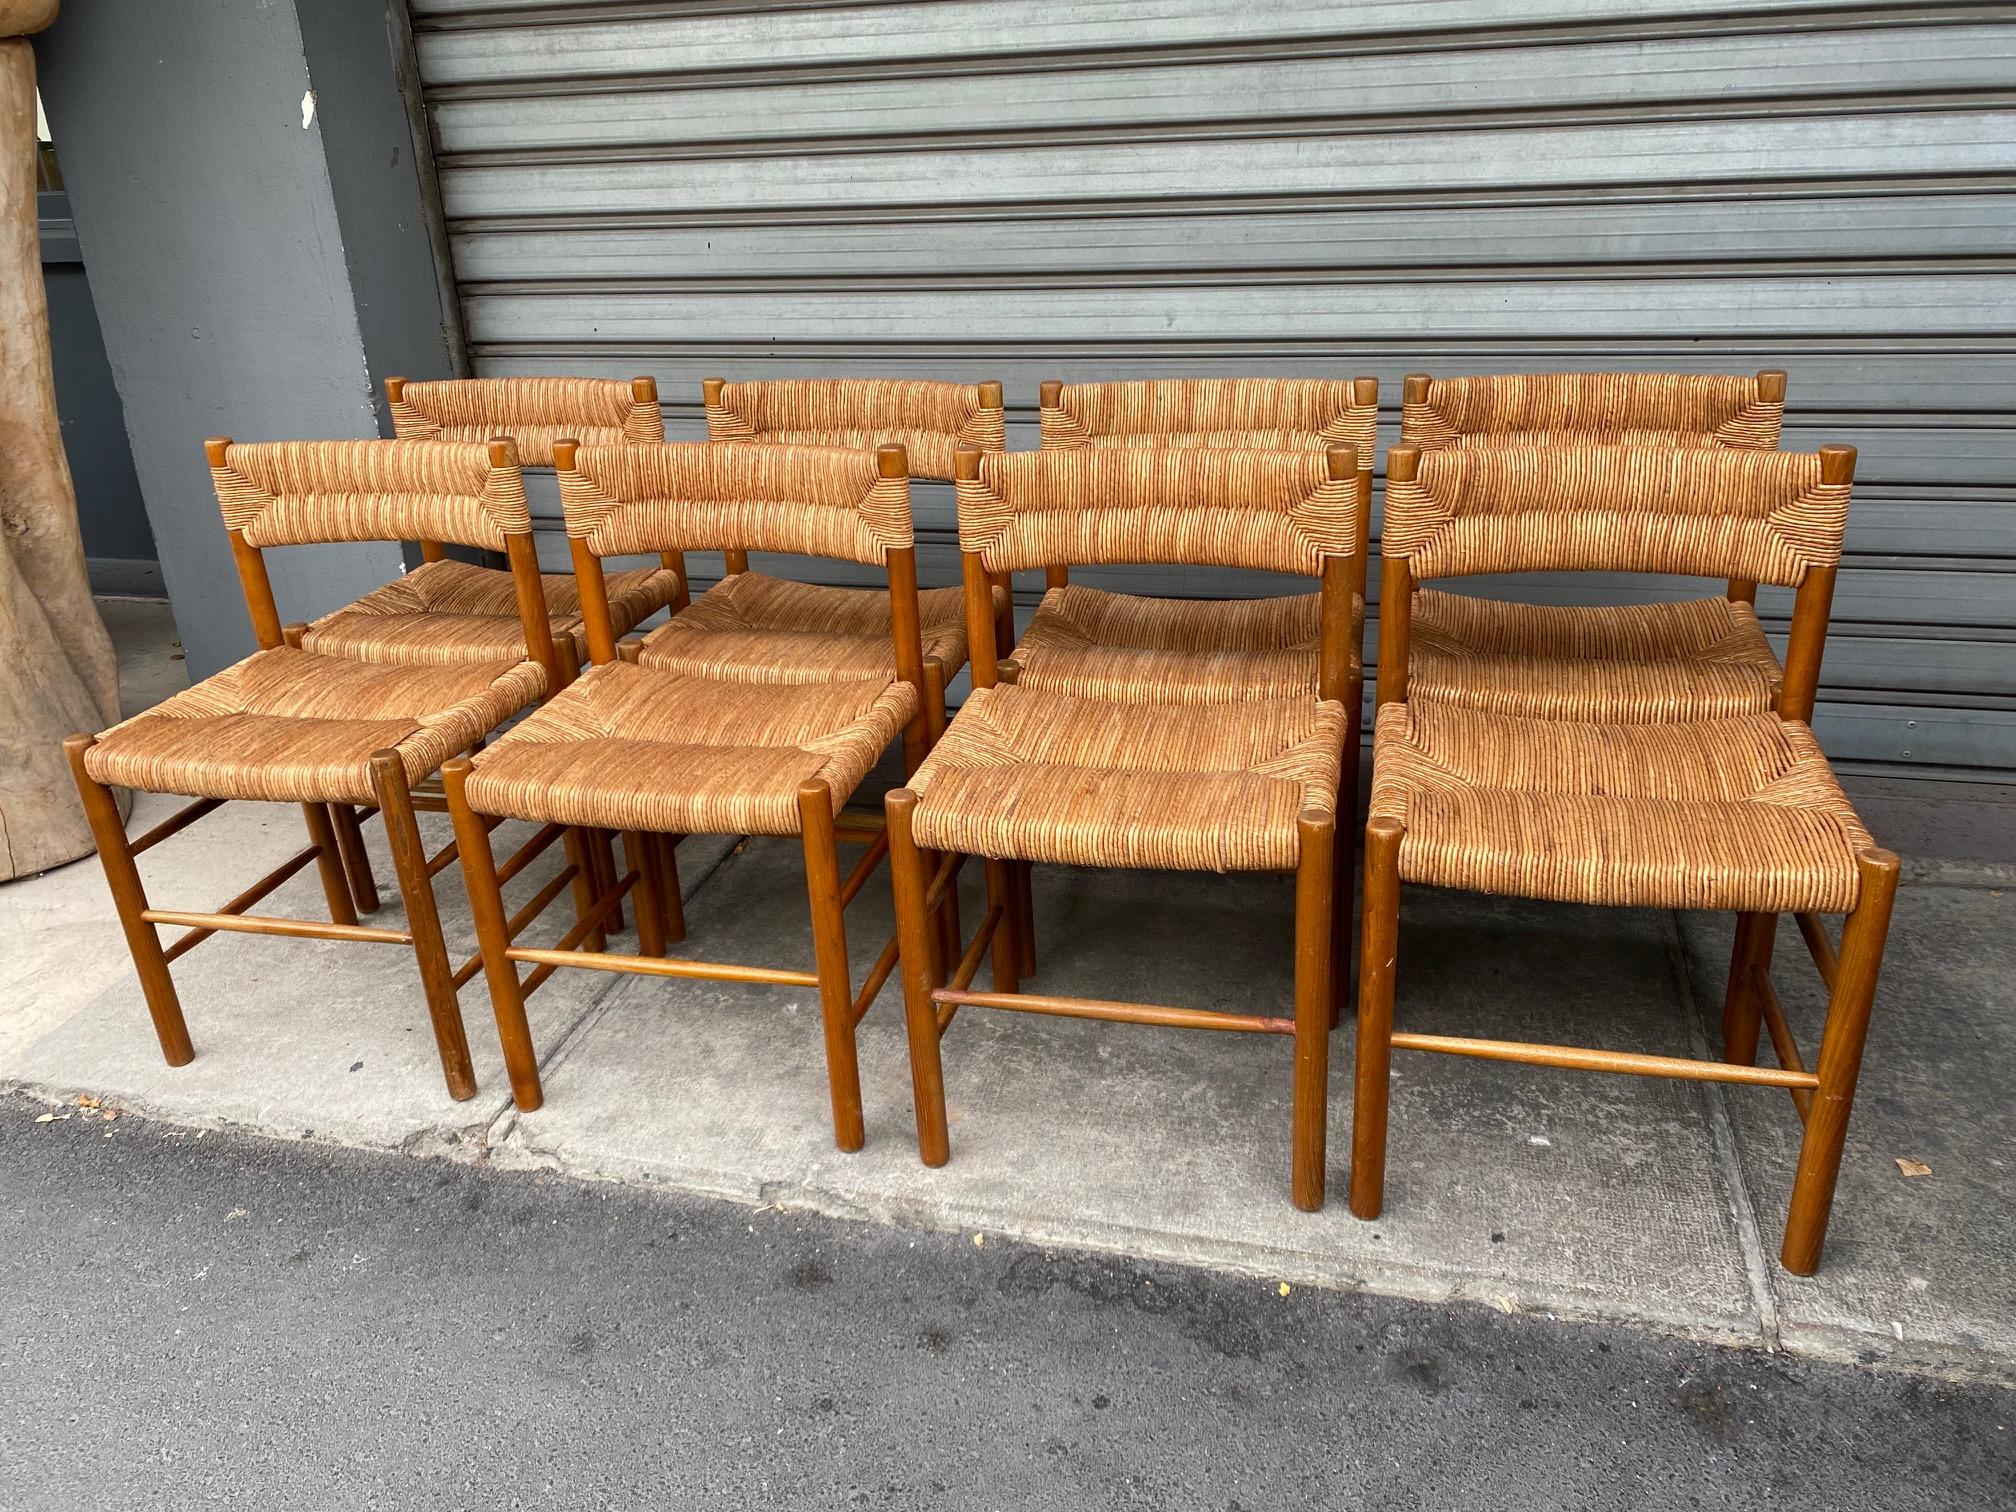 French Set of 8 Dordogne chairs by Charlotte Perriand, France, 1960s